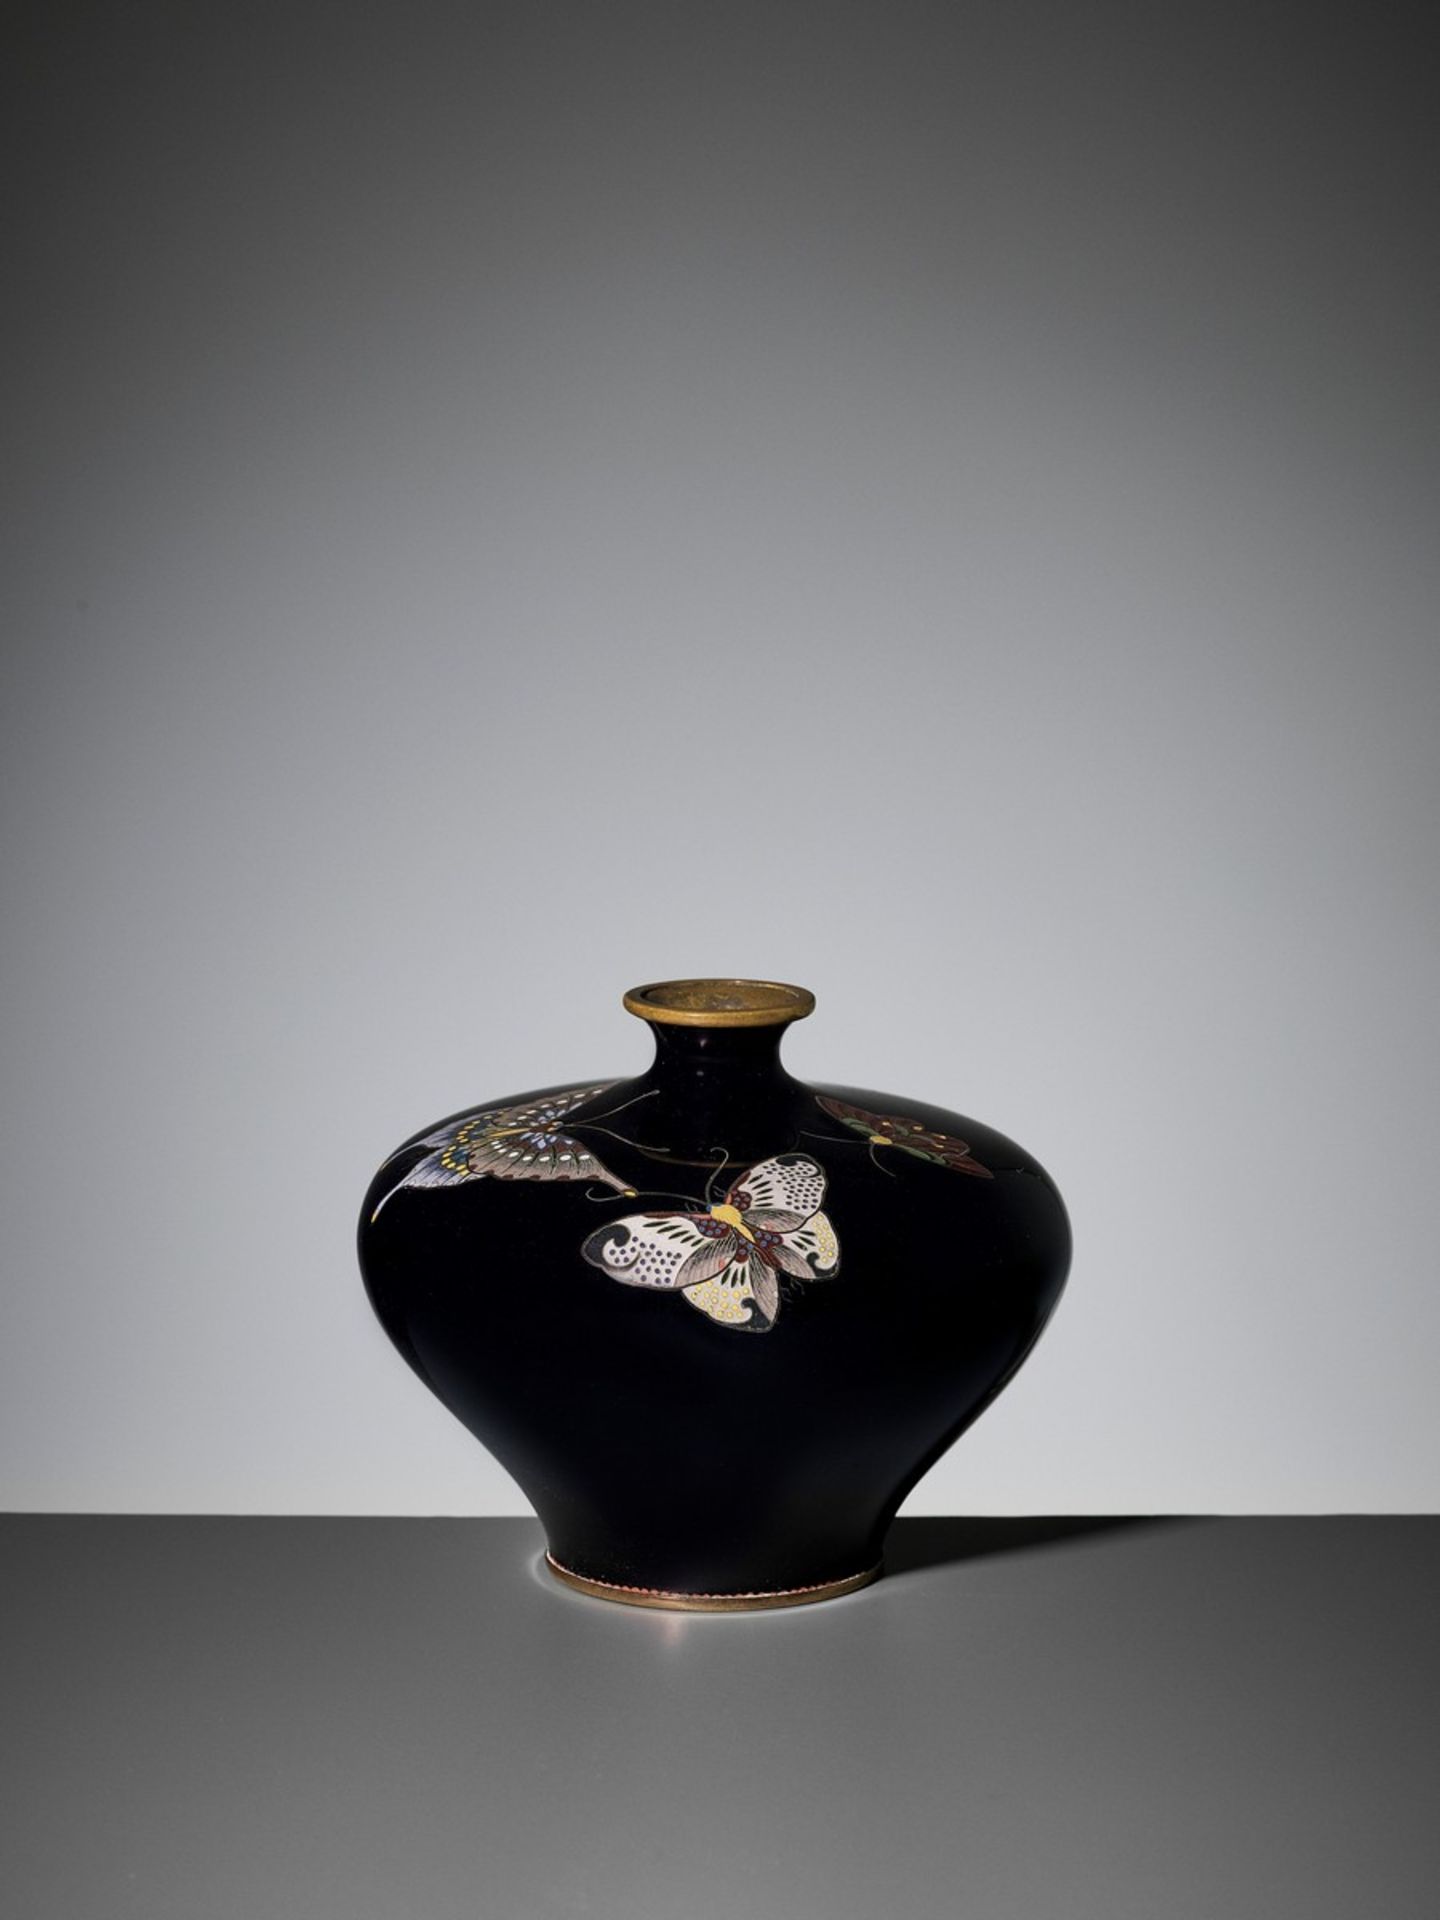 A MIDNIGHT BLUE CLOISONNÉ VASE WITH BUTTERFLIES Japan, Meiji period (1868-1912)The vase with an